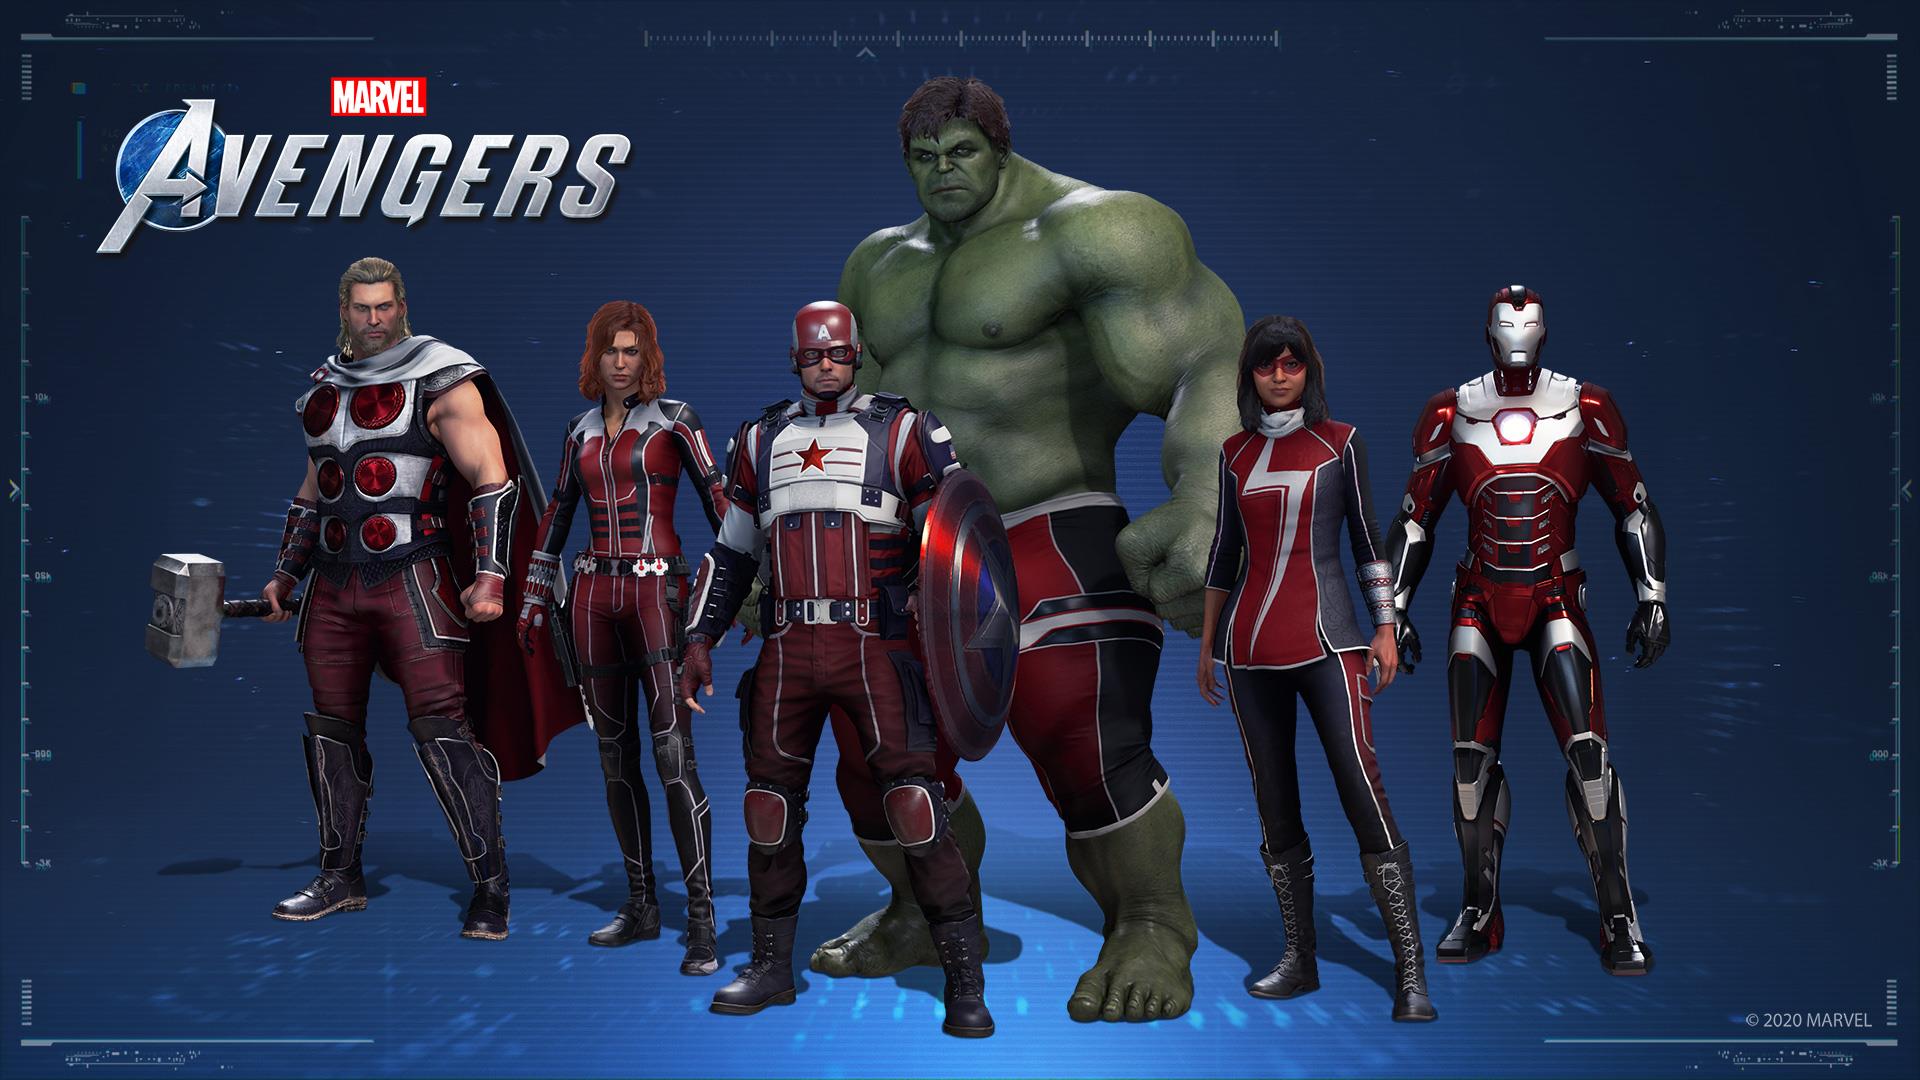 Marvel's Avengers has exclusive content for Virgin, Verizon, Intel. and 5 Gum customers